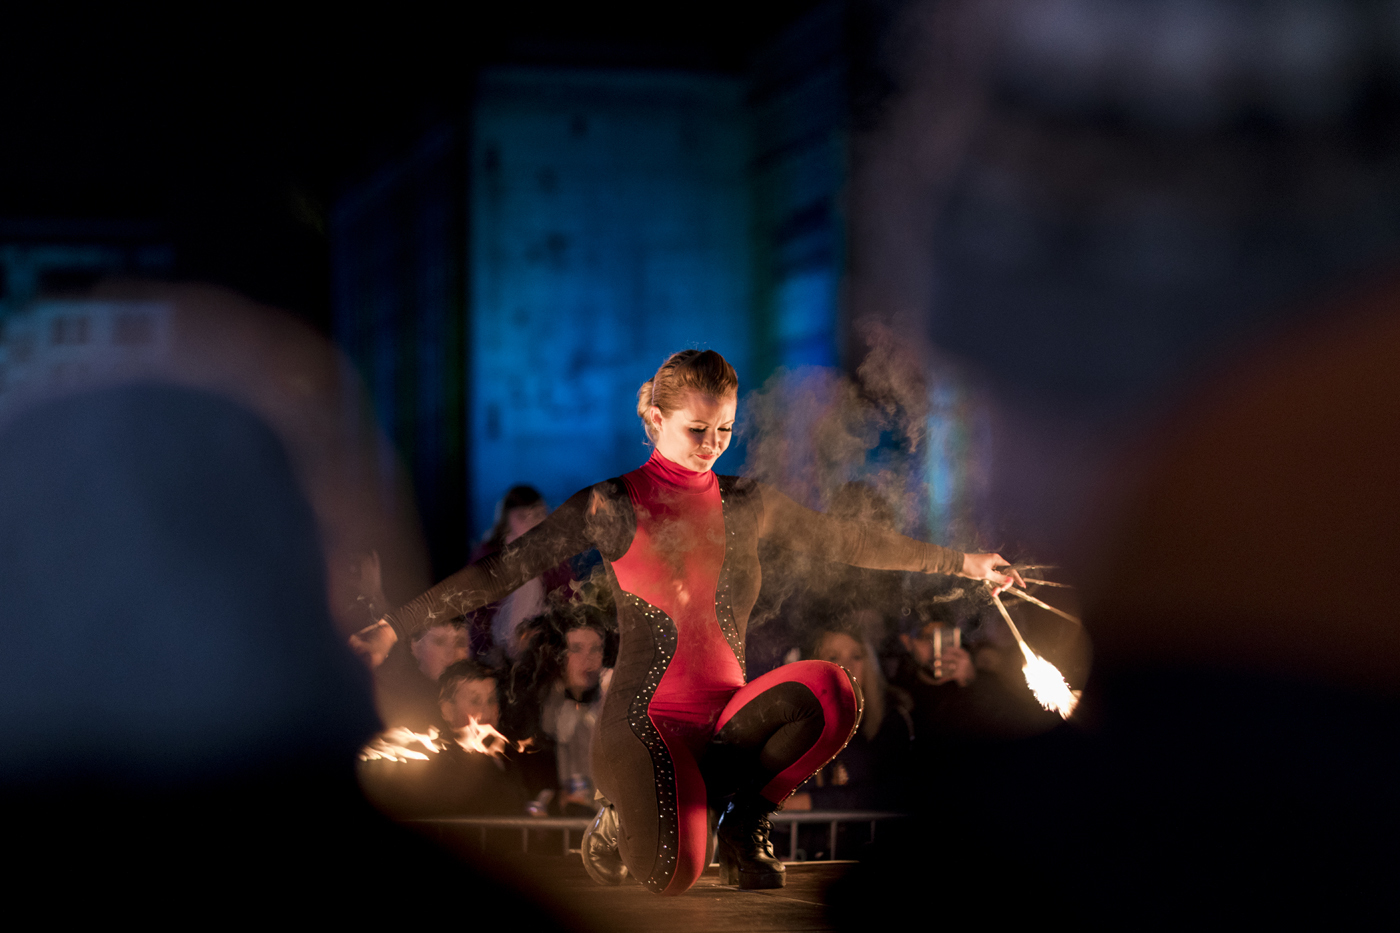 Dancer crouching down twirling sticks with fire on either end